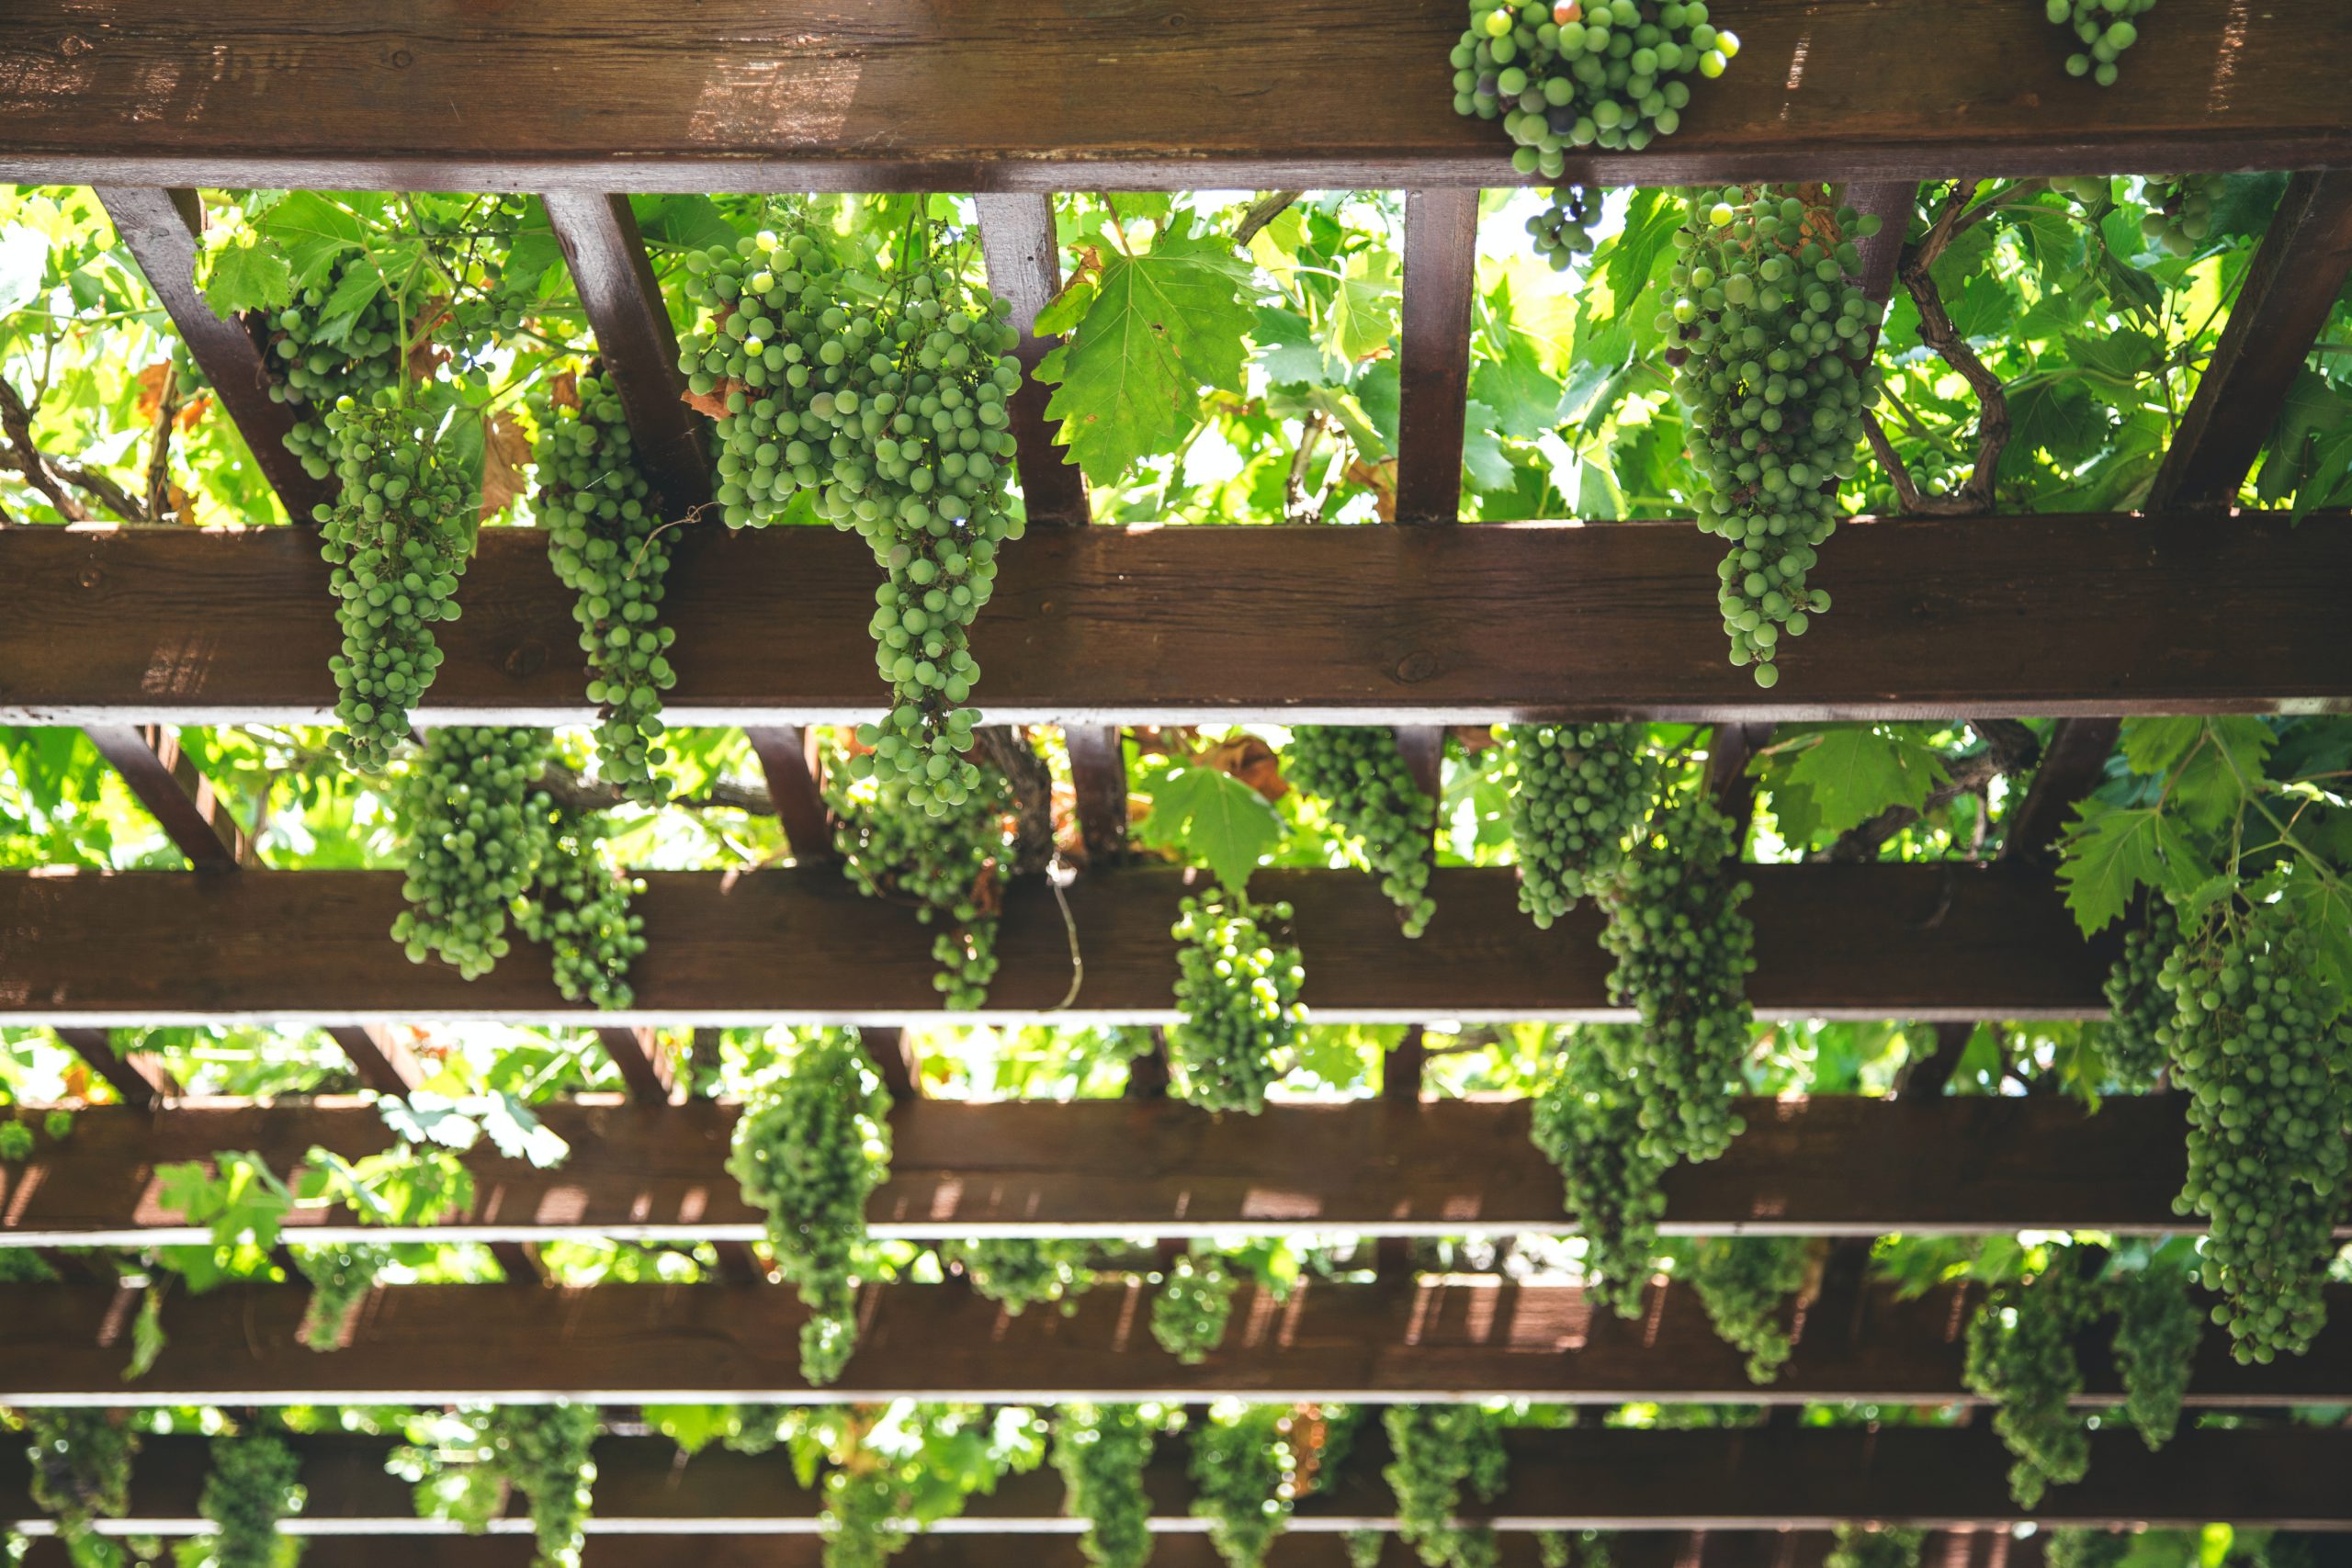 Large pergola with vines and grapes hanging down